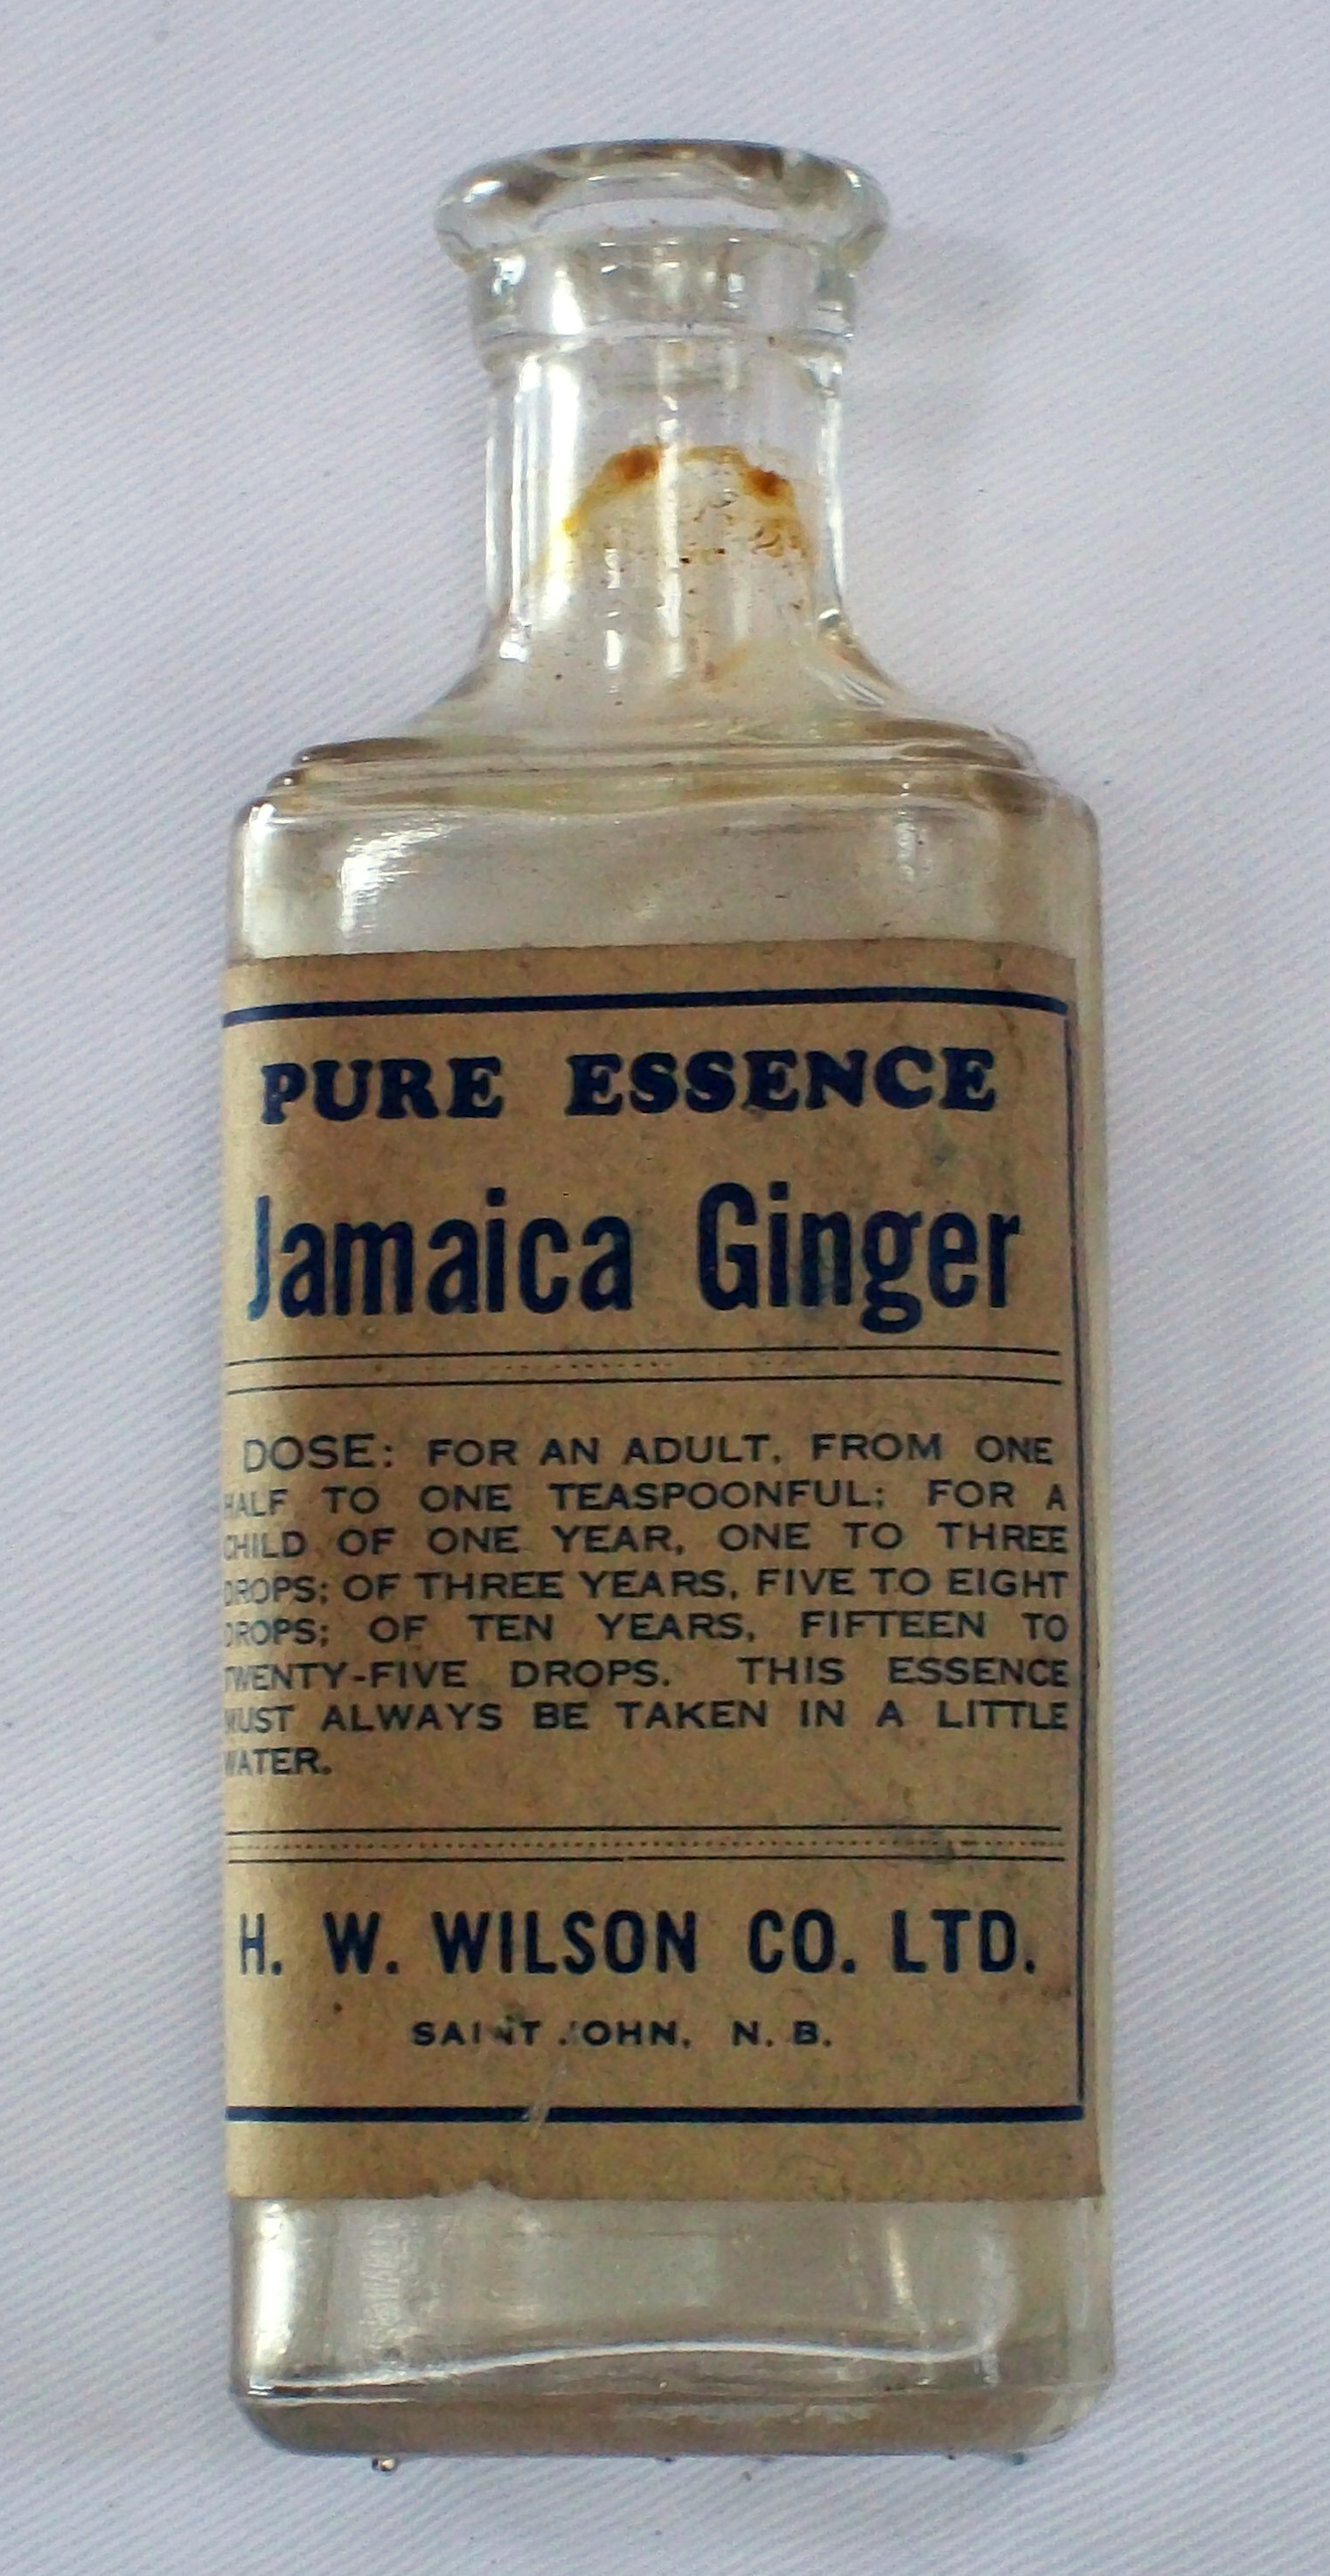 Ginger's role in cures and courtroom battles